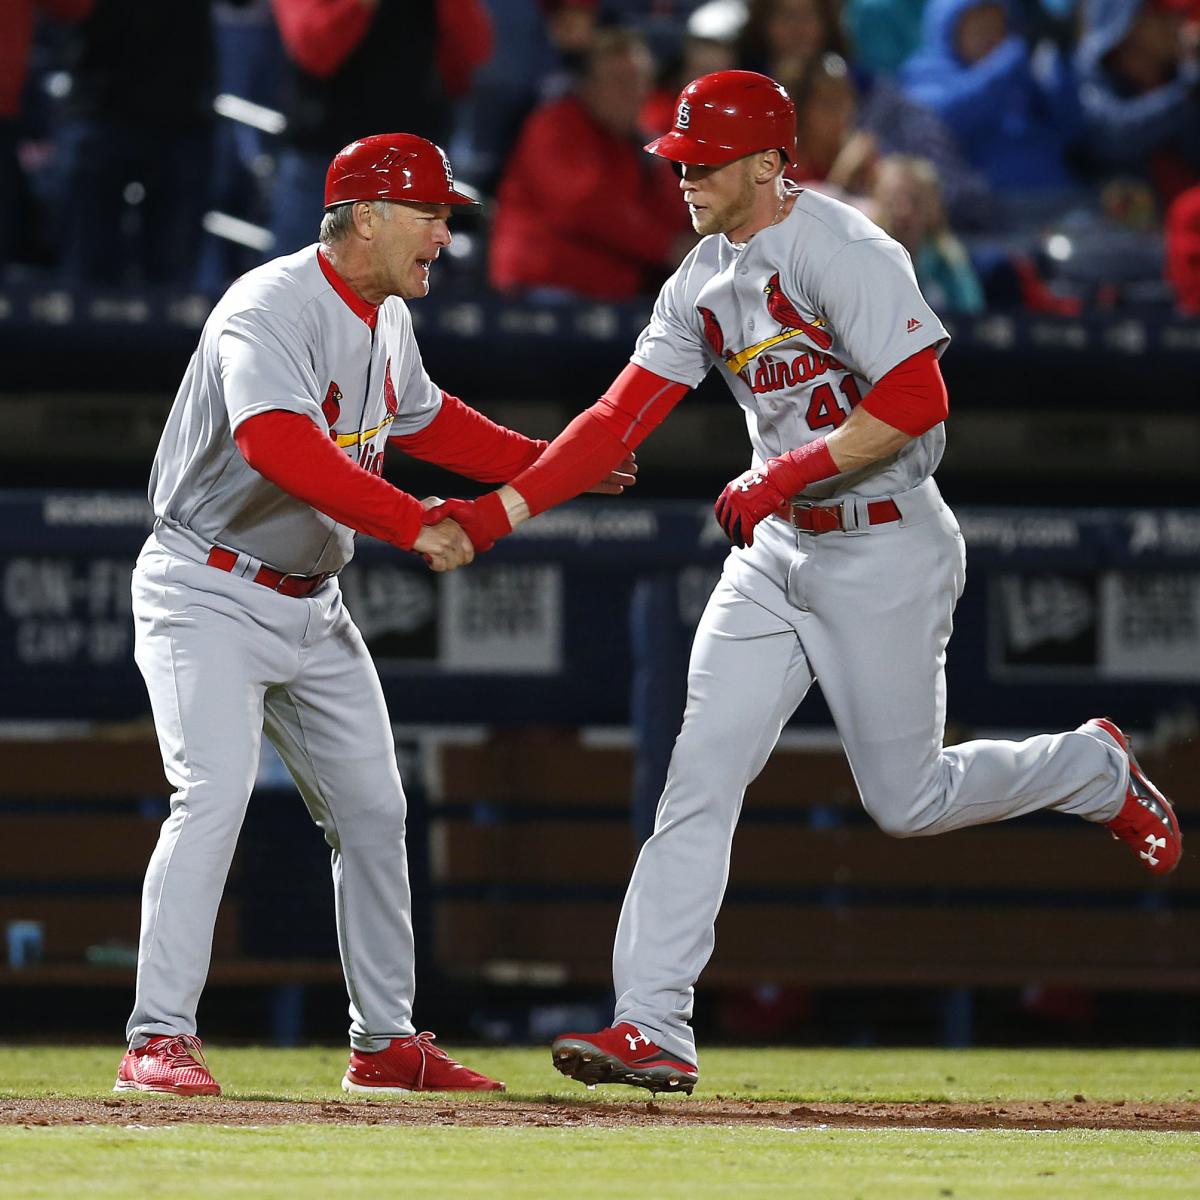 Cardinals Set Single-Game MLB Record with 3 Pinch-Hit Home Runs | Bleacher Report | Latest News ...